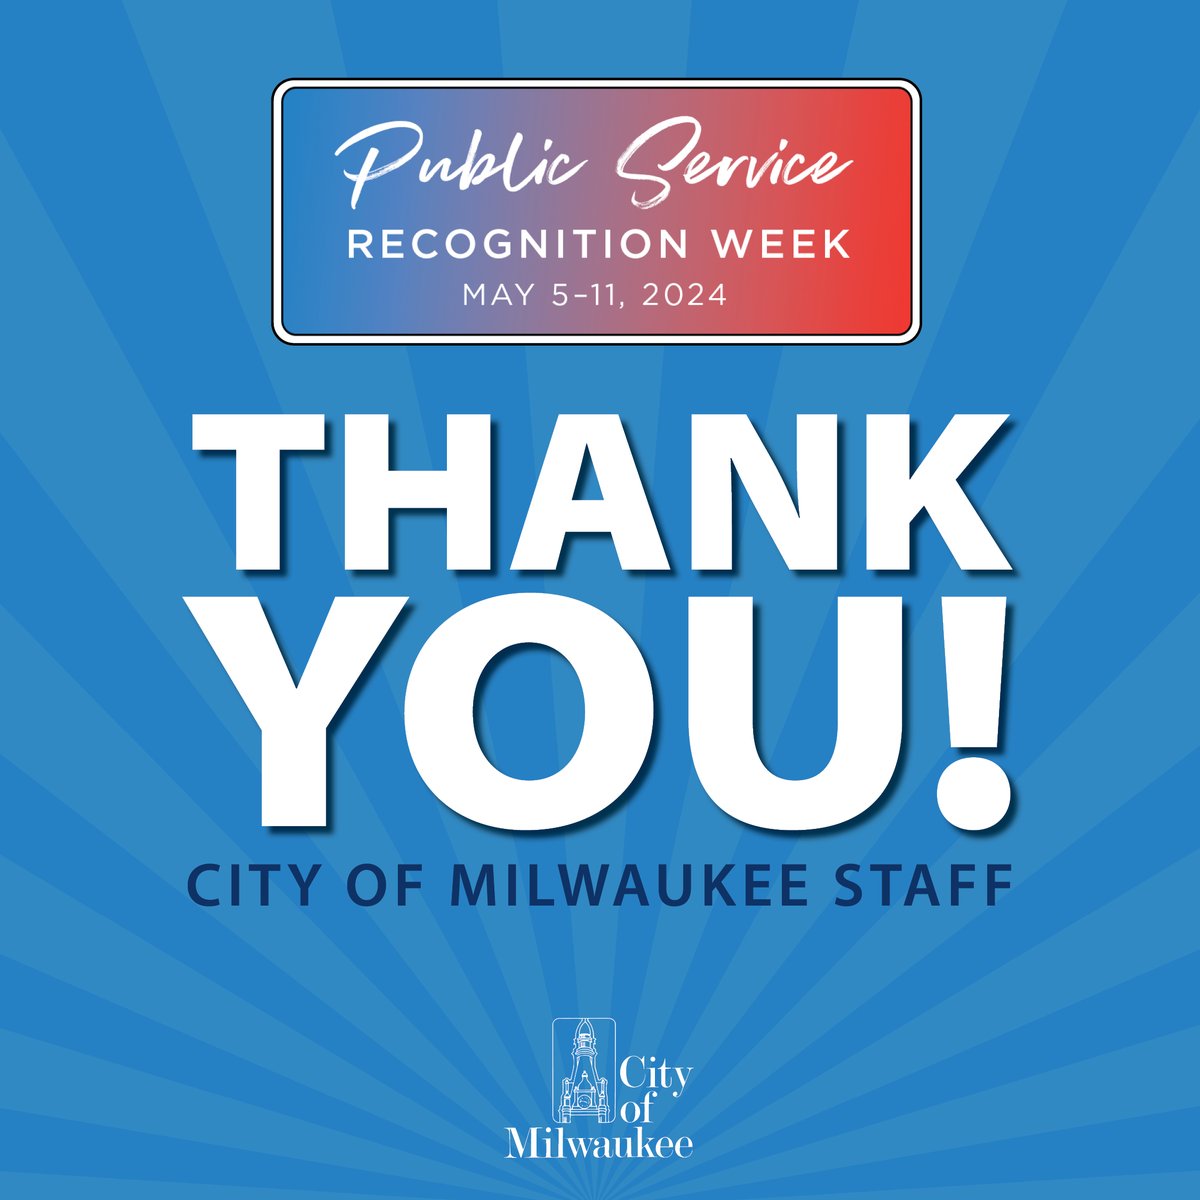 Happy Public Service Recognition Week from all of us at the City of Milwaukee!🎉It’s especially important for us to recognize govt workers who do important work that positively affects all of us every day. Thanks for your dedication! #PSRW Get resources➡️milwaukee.gov/psrw#PSRW